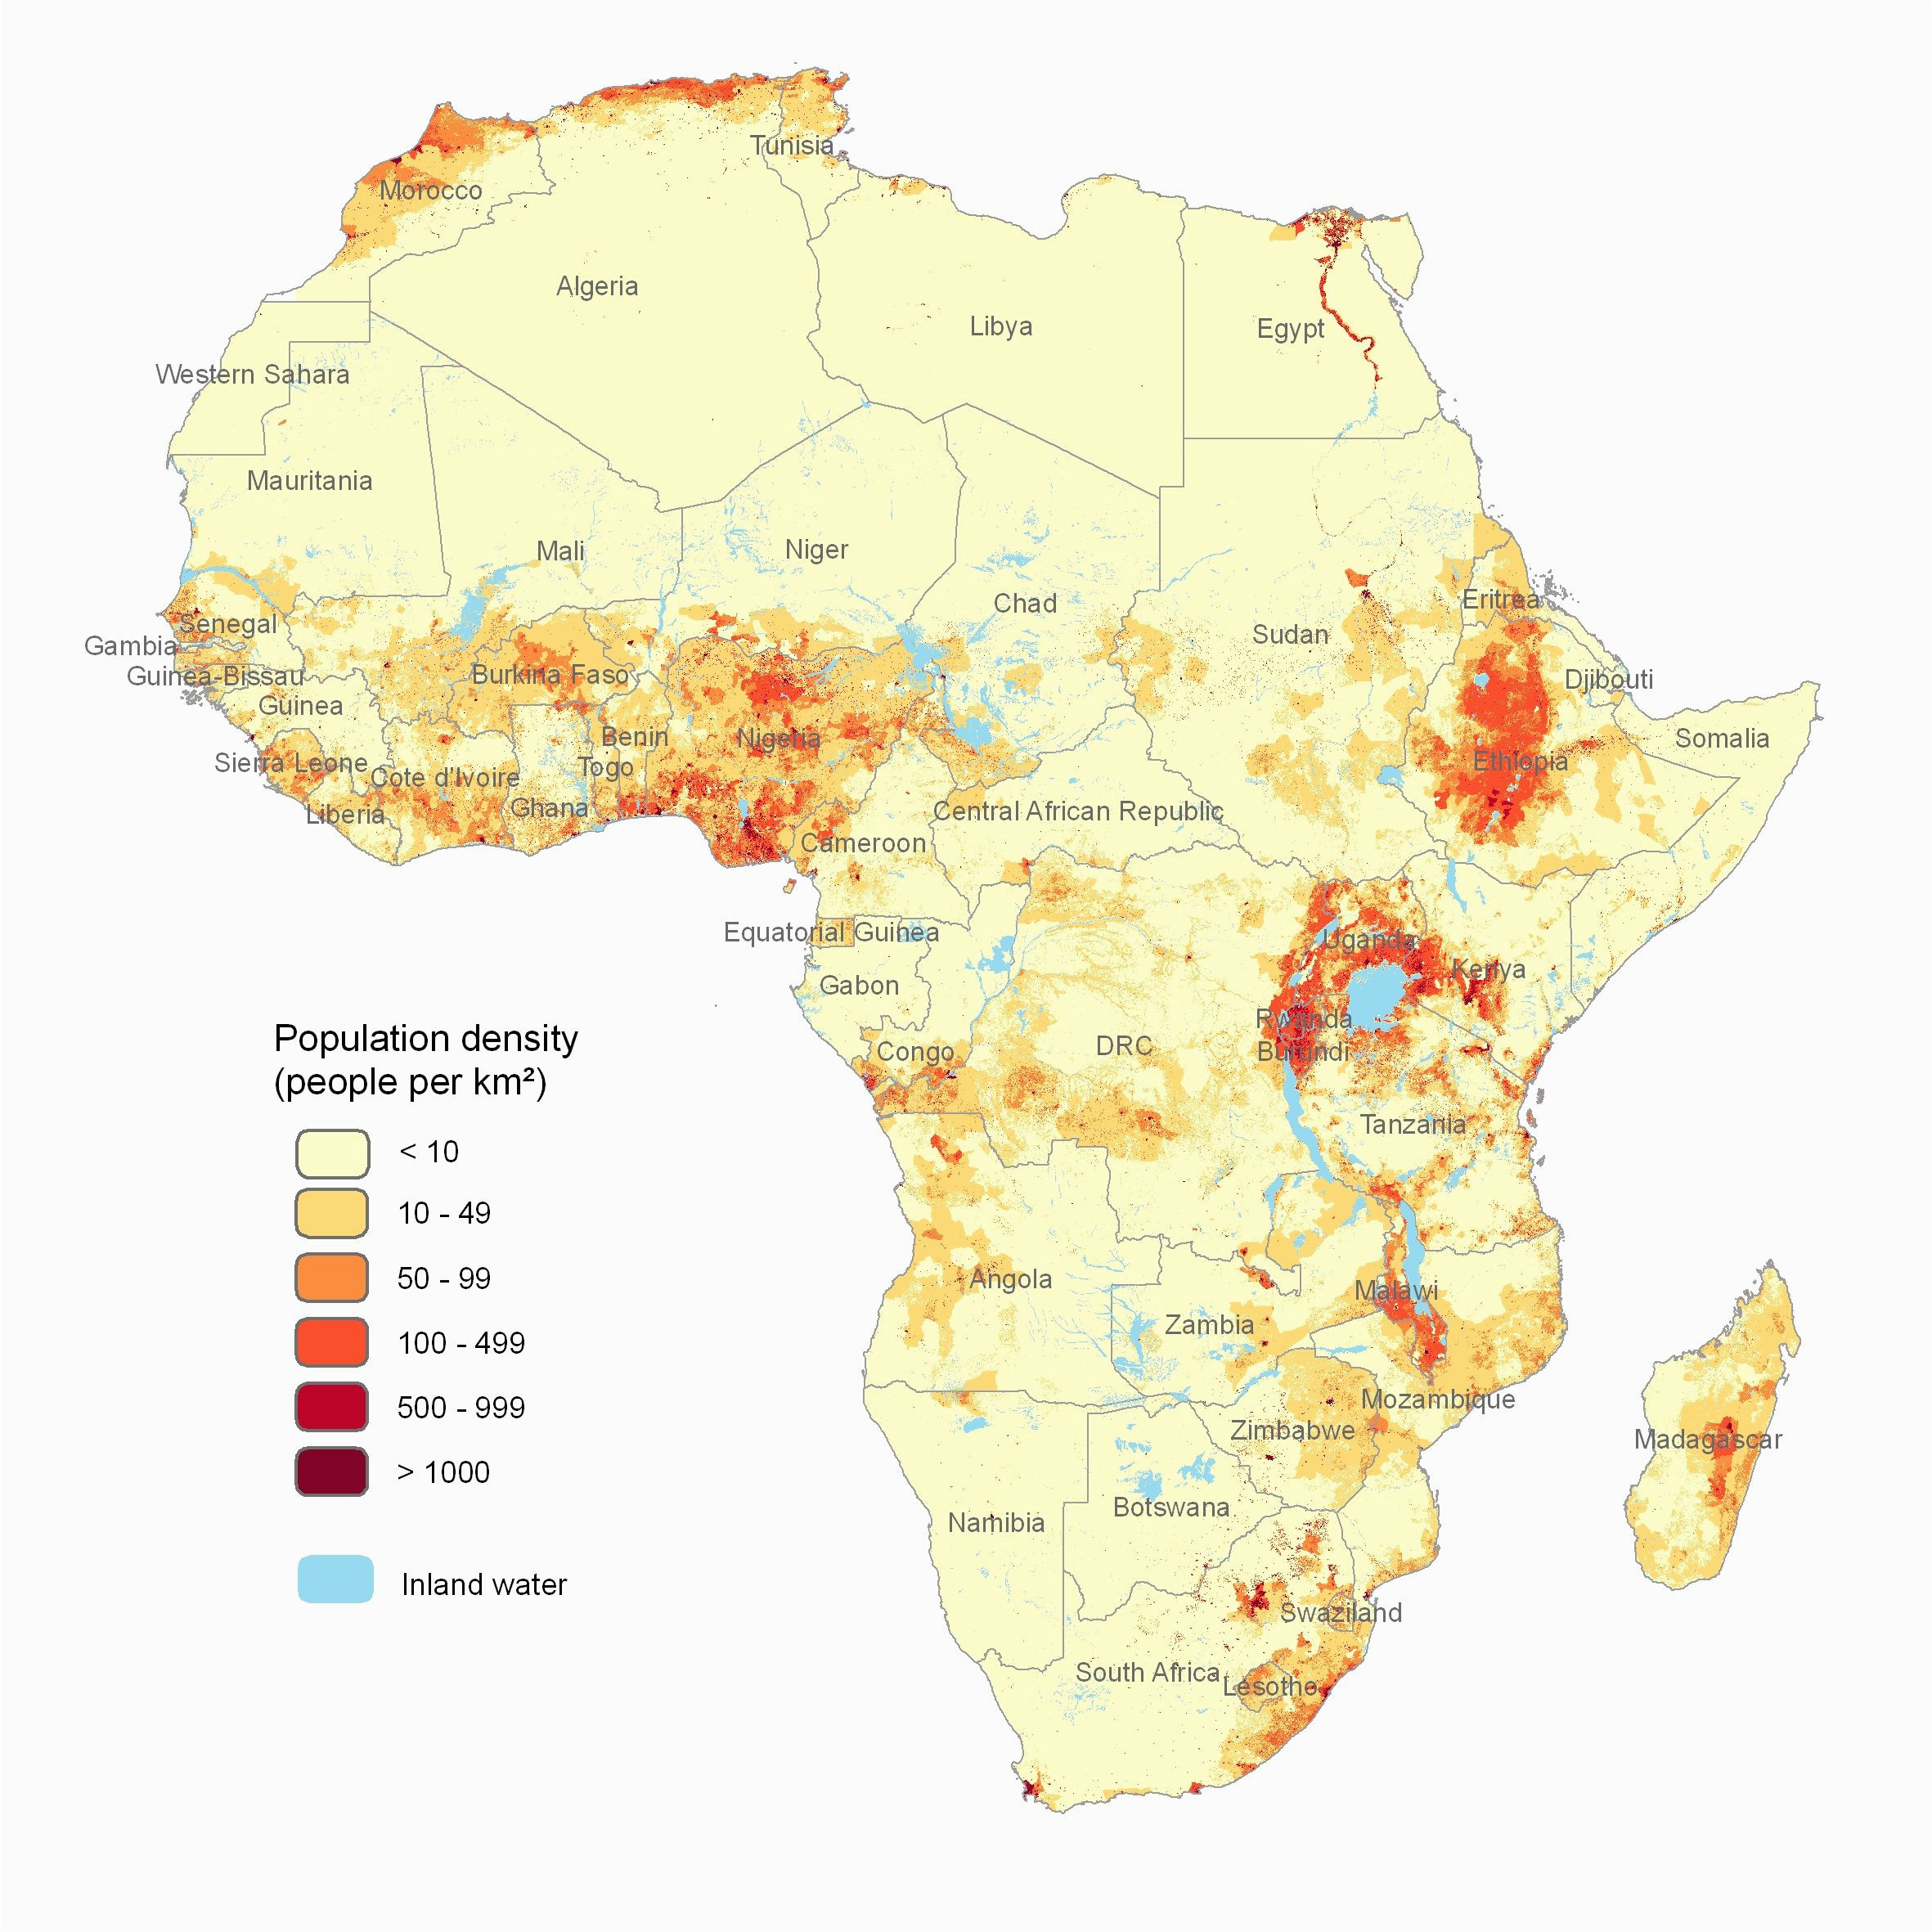 population density of africa maps pinterest africa map map